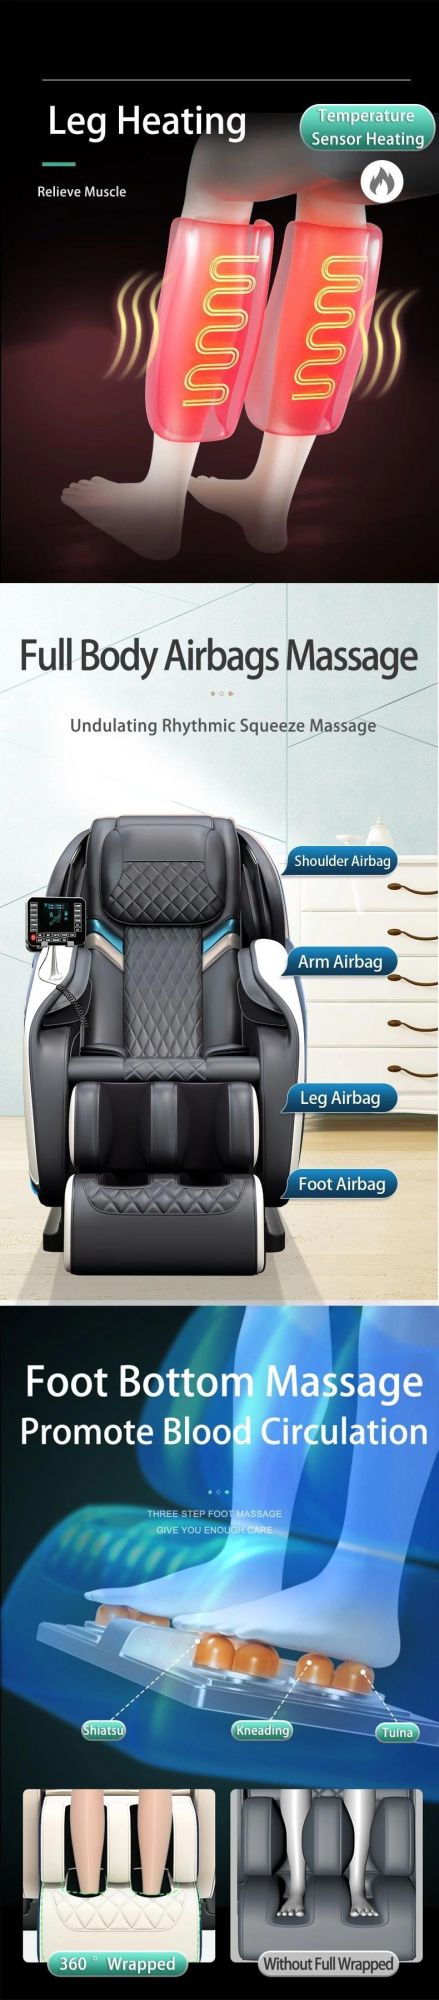 Gravity 4D Massage Chair Heated Air Compression Sleeping Massage Chair with 2 Control Systems Full Body Massage Chair